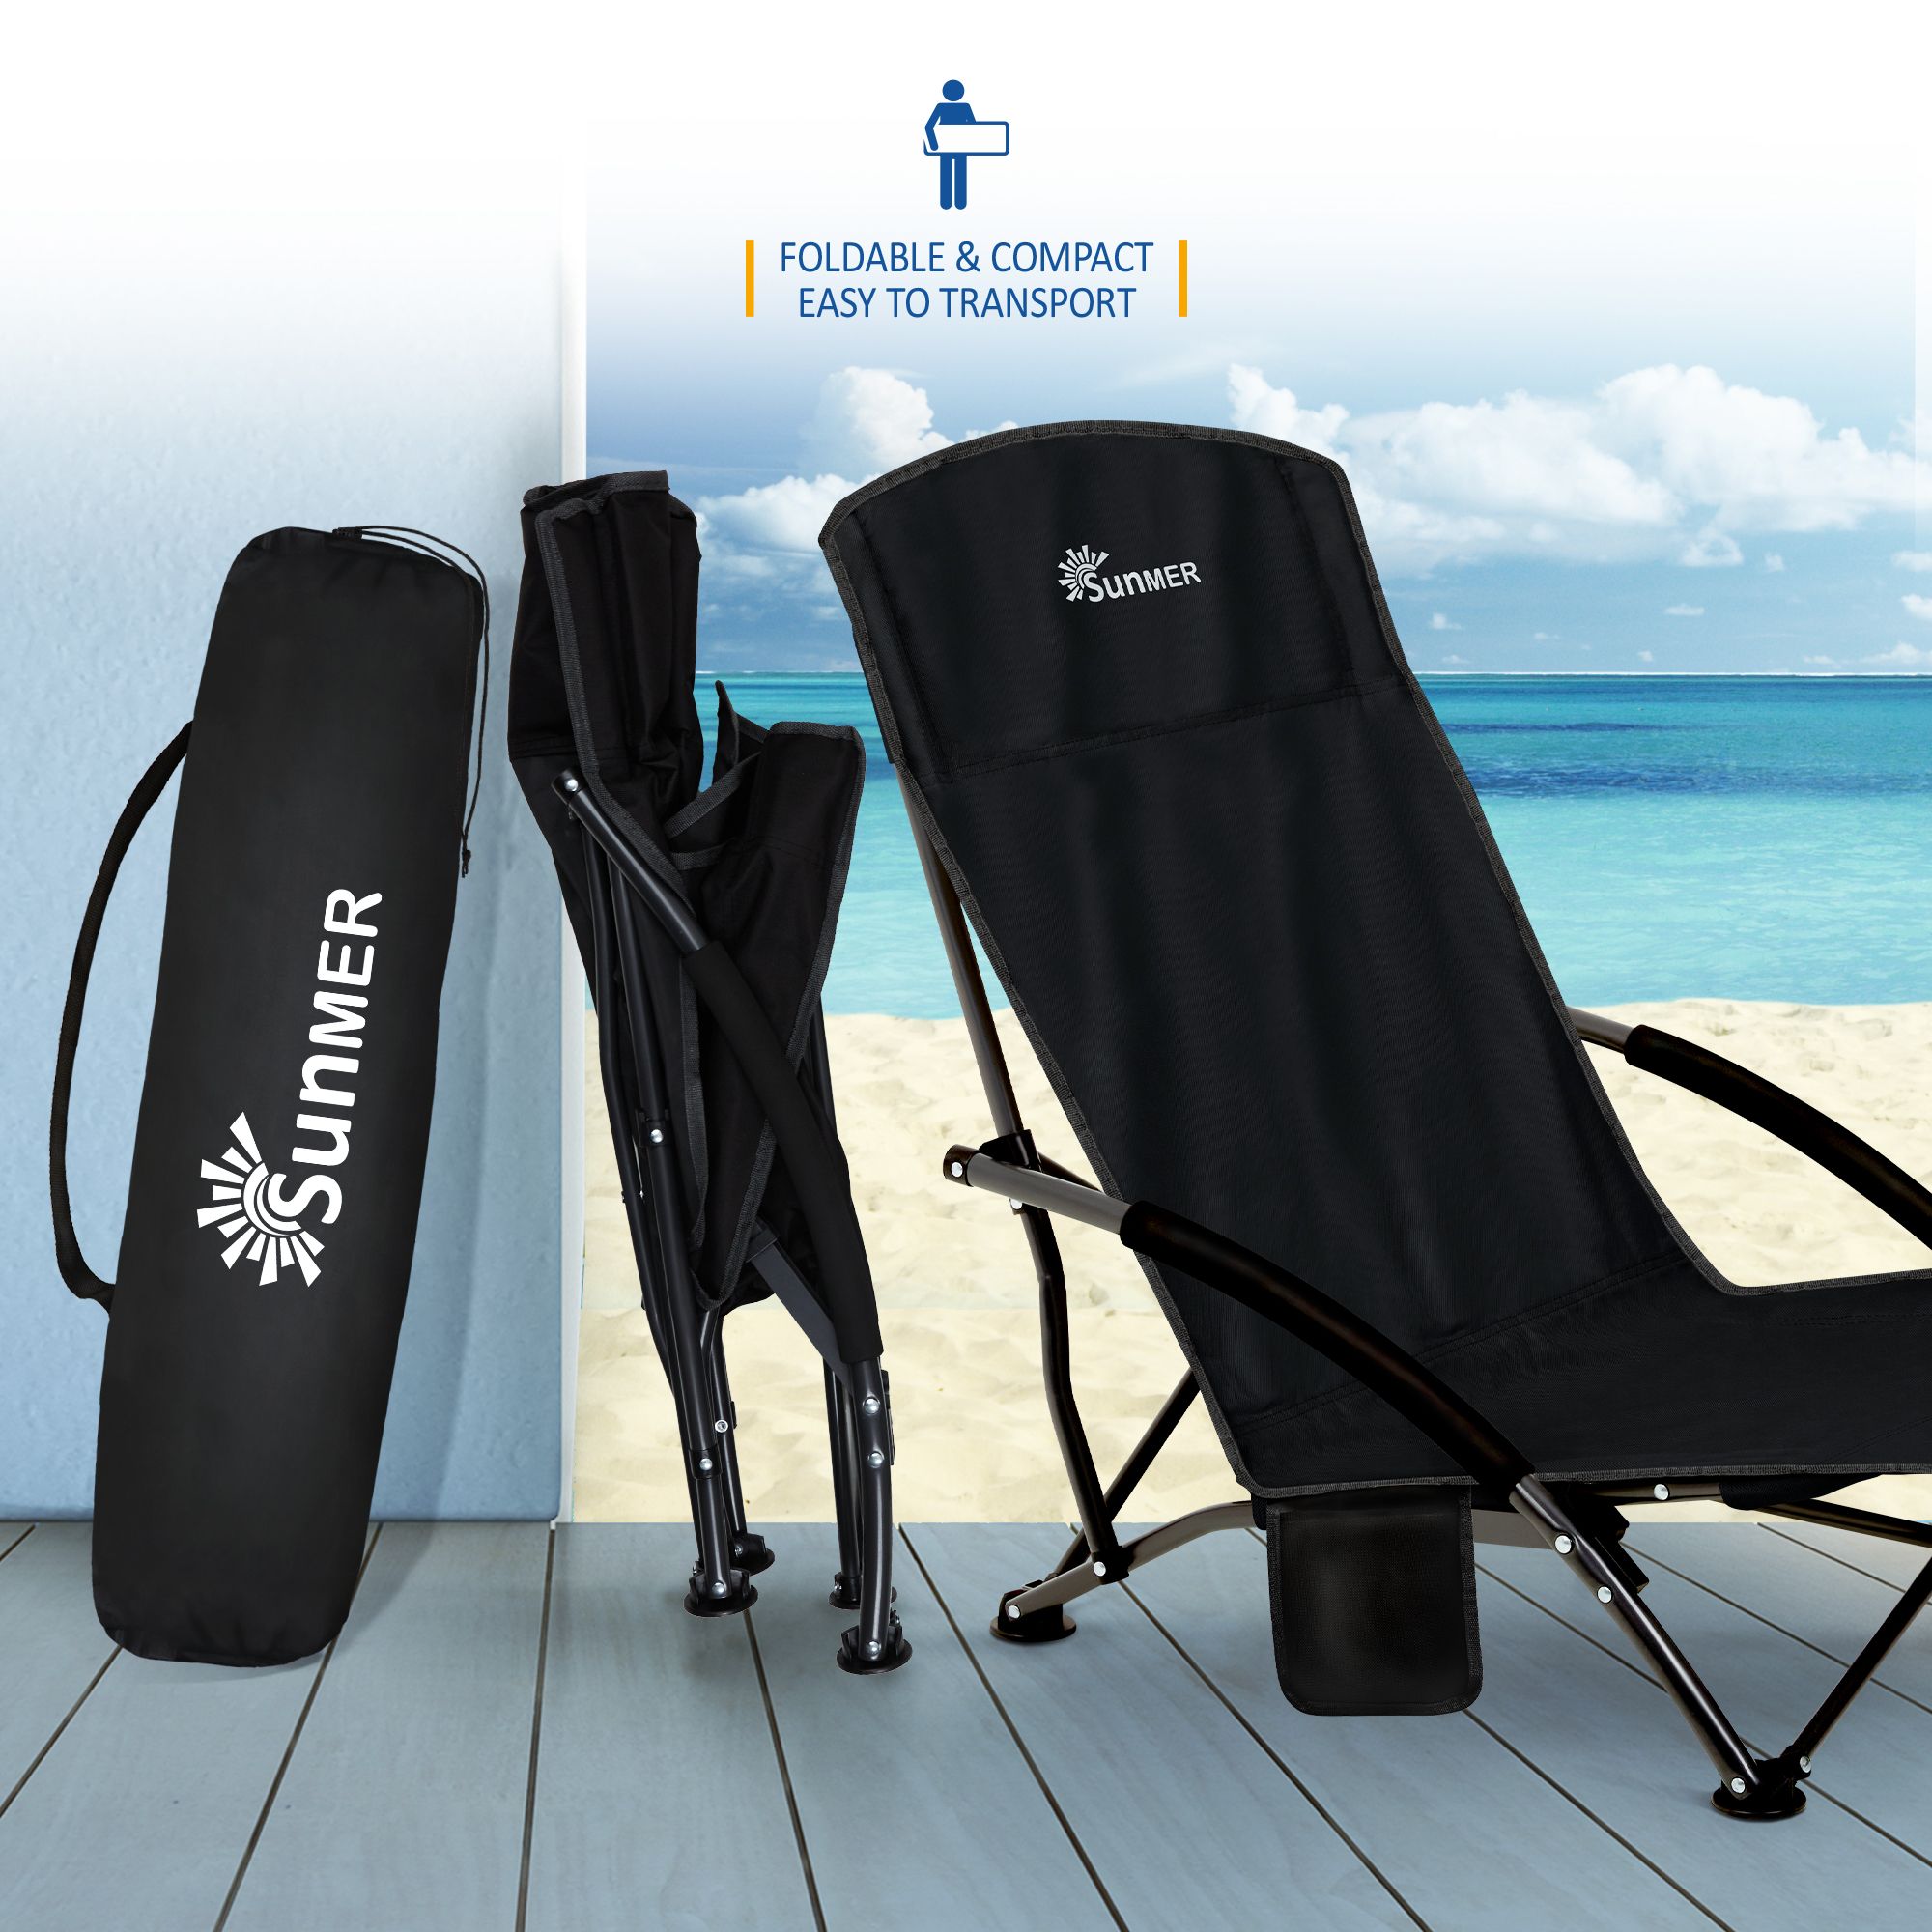 Lightweight Foldable Beach Chair Set of 2 - with Carry Bag - Black